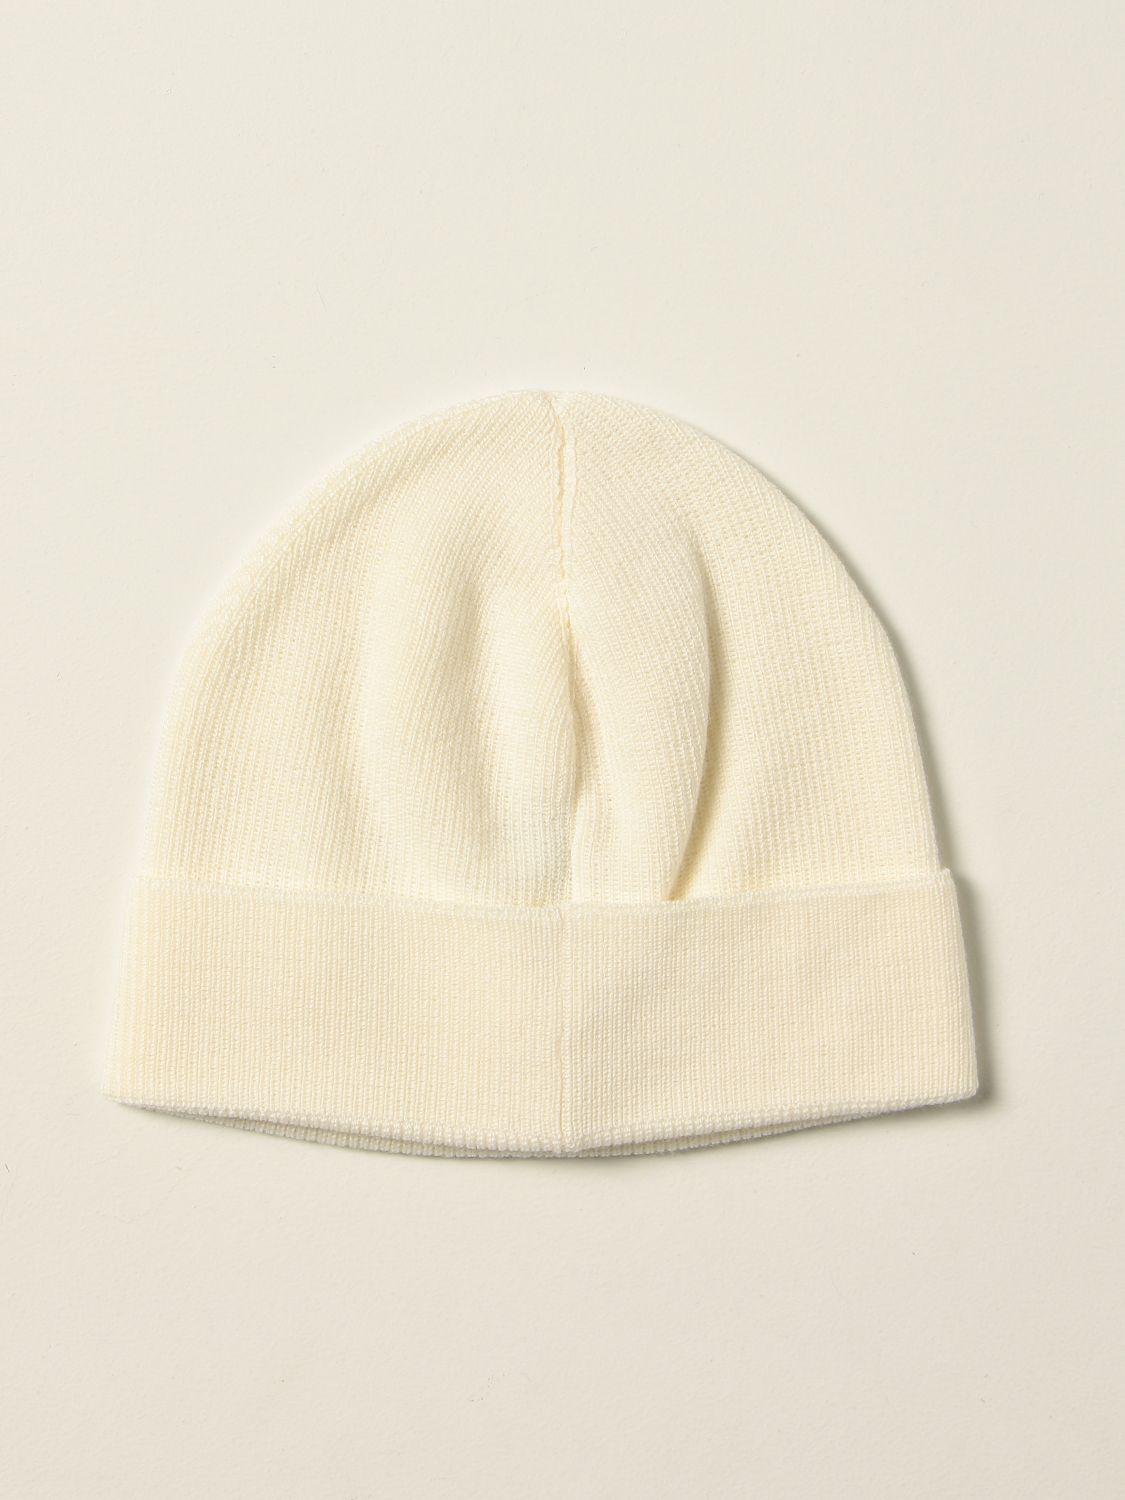 Hat Moncler: Moncler beanie hat in wool blend yellow cream 2